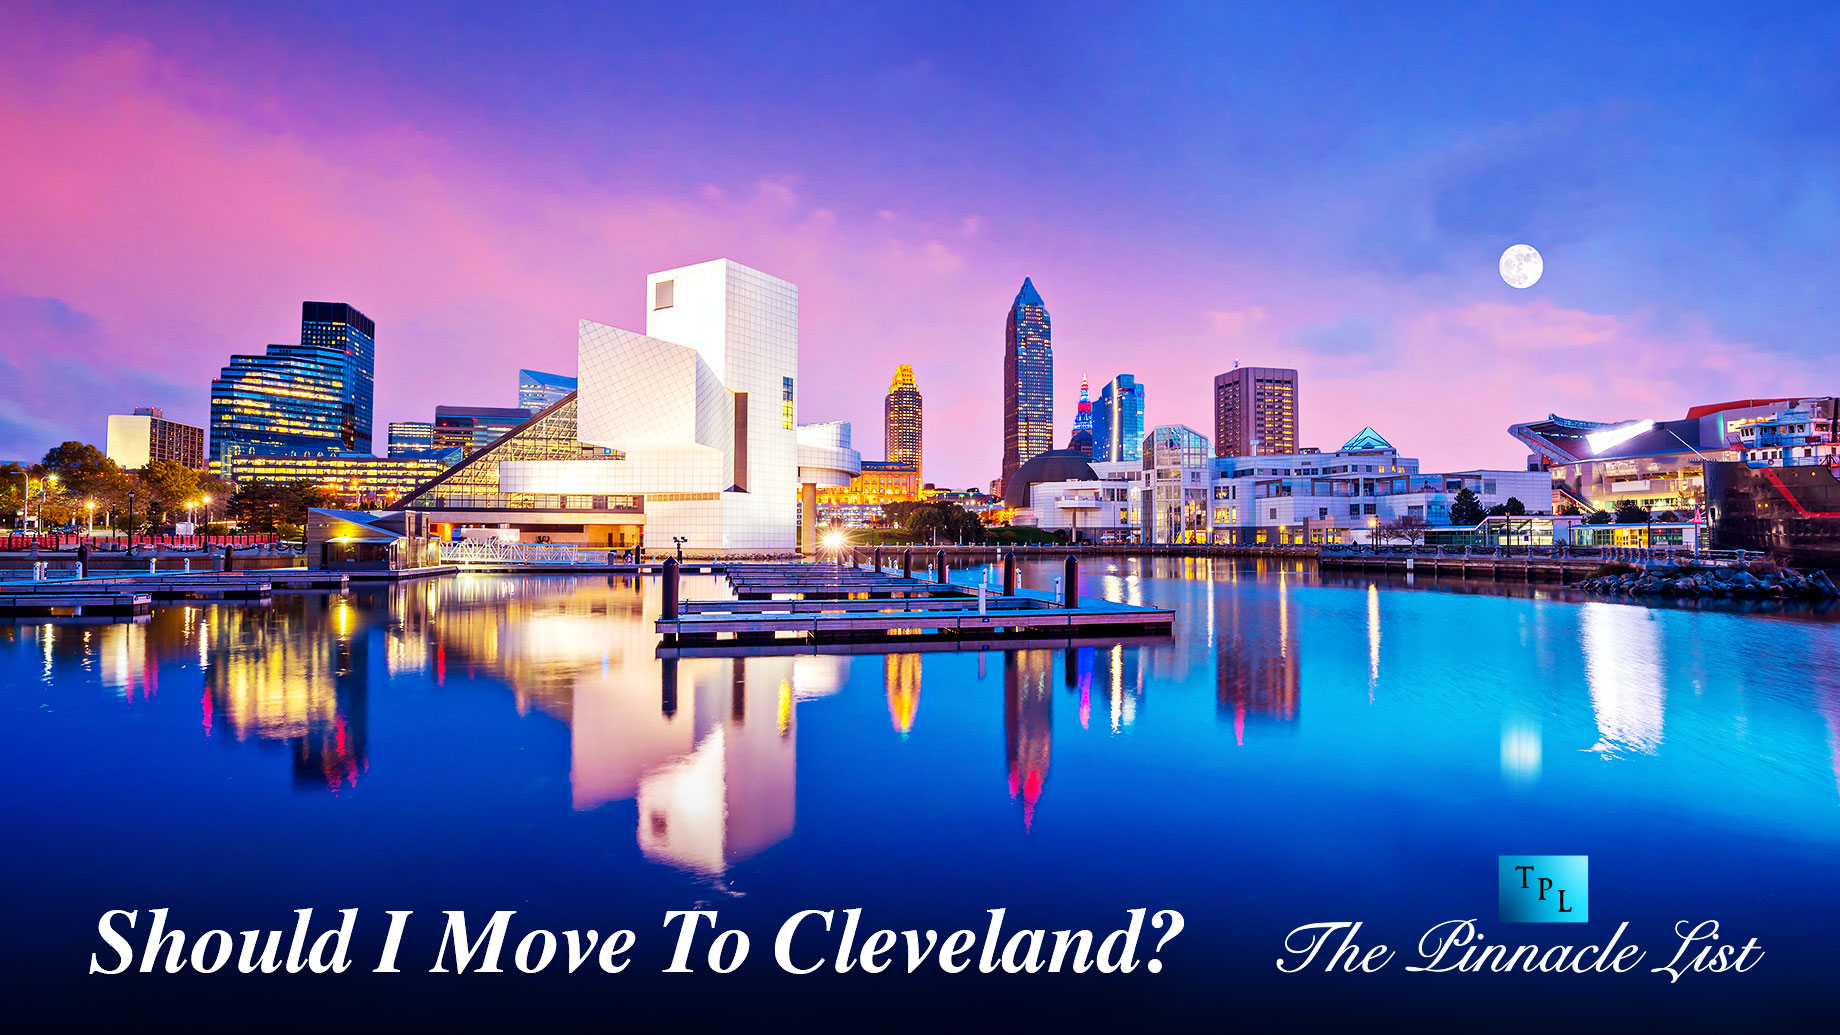 Should I Move To Cleveland?